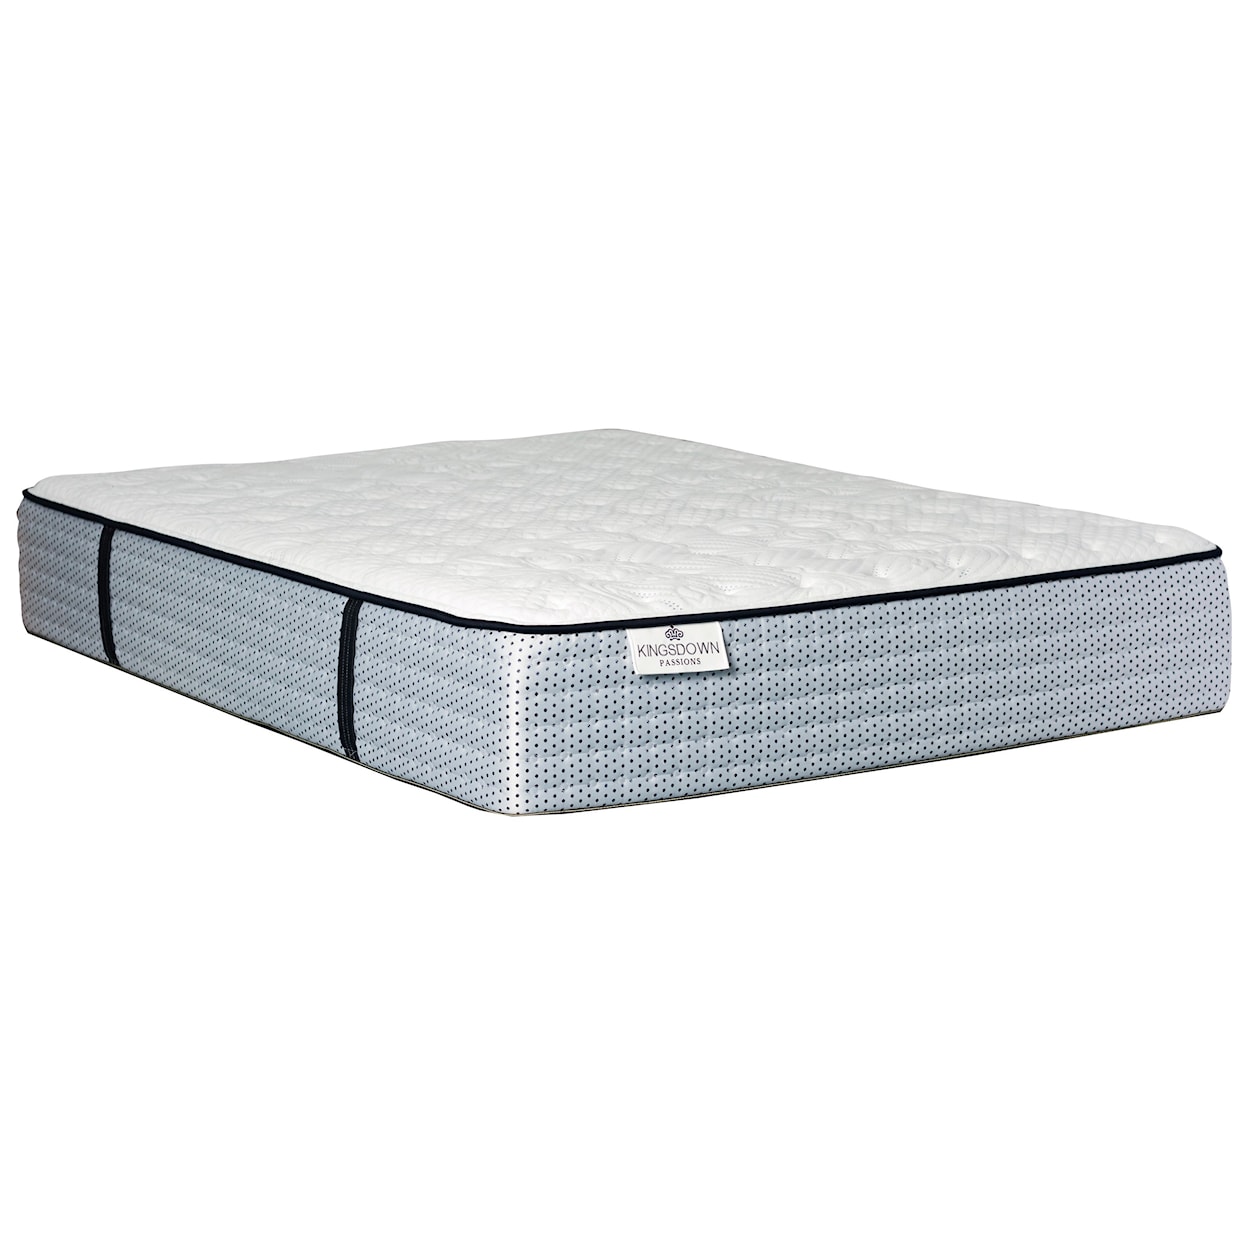 Kingsdown Passions Le Claire TT Full Pocketed Coil Mattress